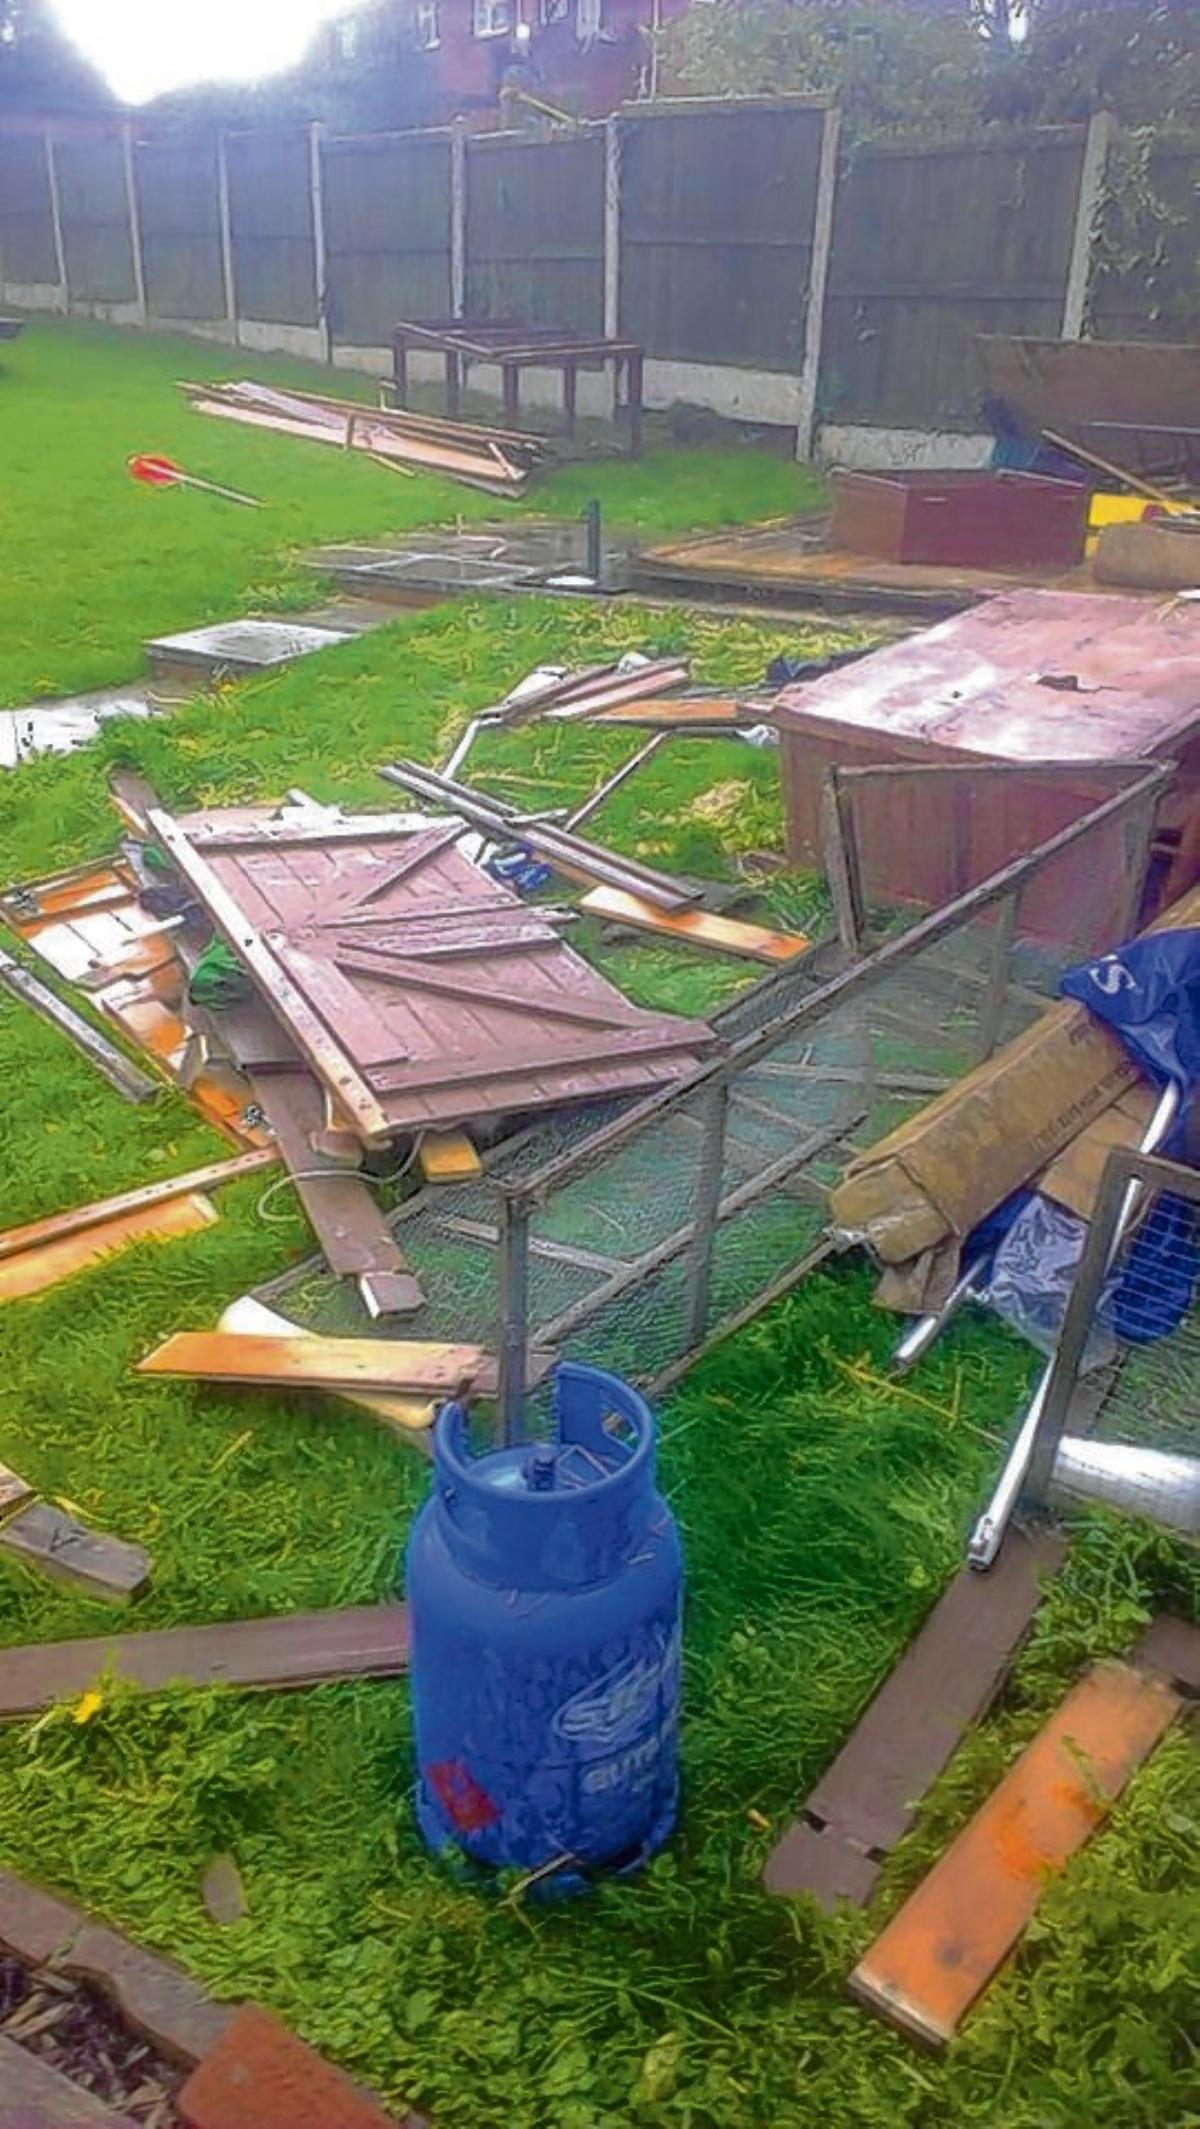 A shed was destroyed in Graham Fretwell's parent's house in Coldnailhurst Avenue, Braintree. The shed roof ended up in his garden next door.